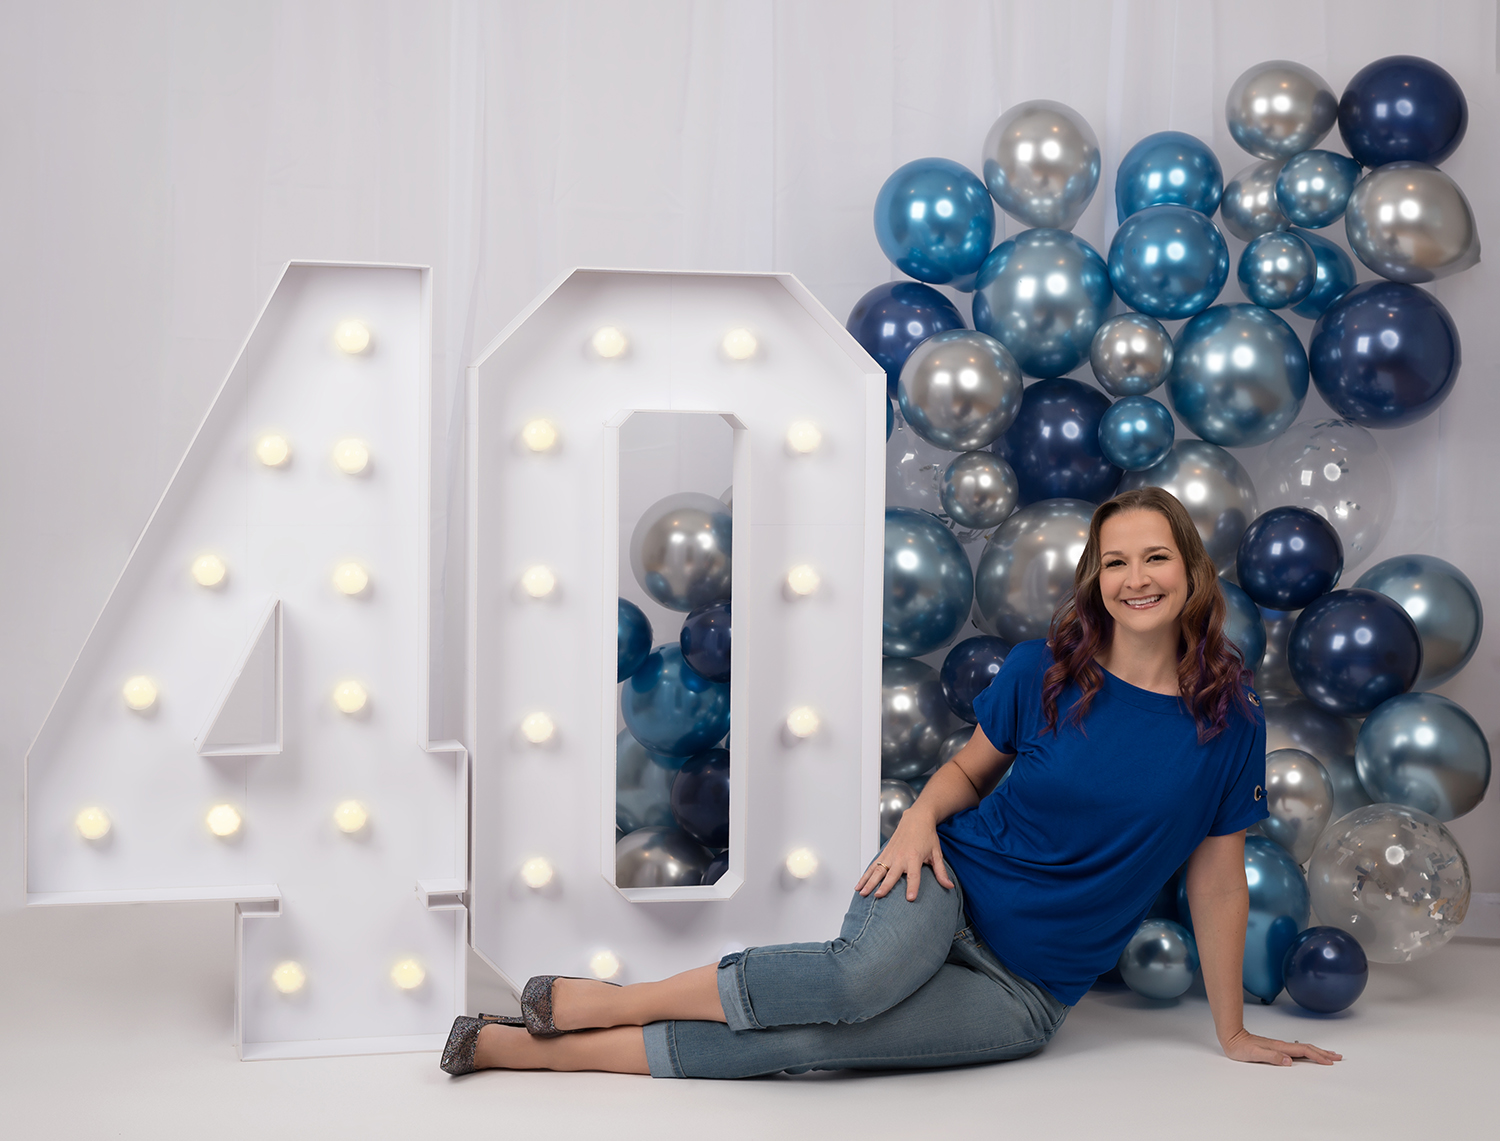 Woman sitting on floor next to large 40 sign and balloons